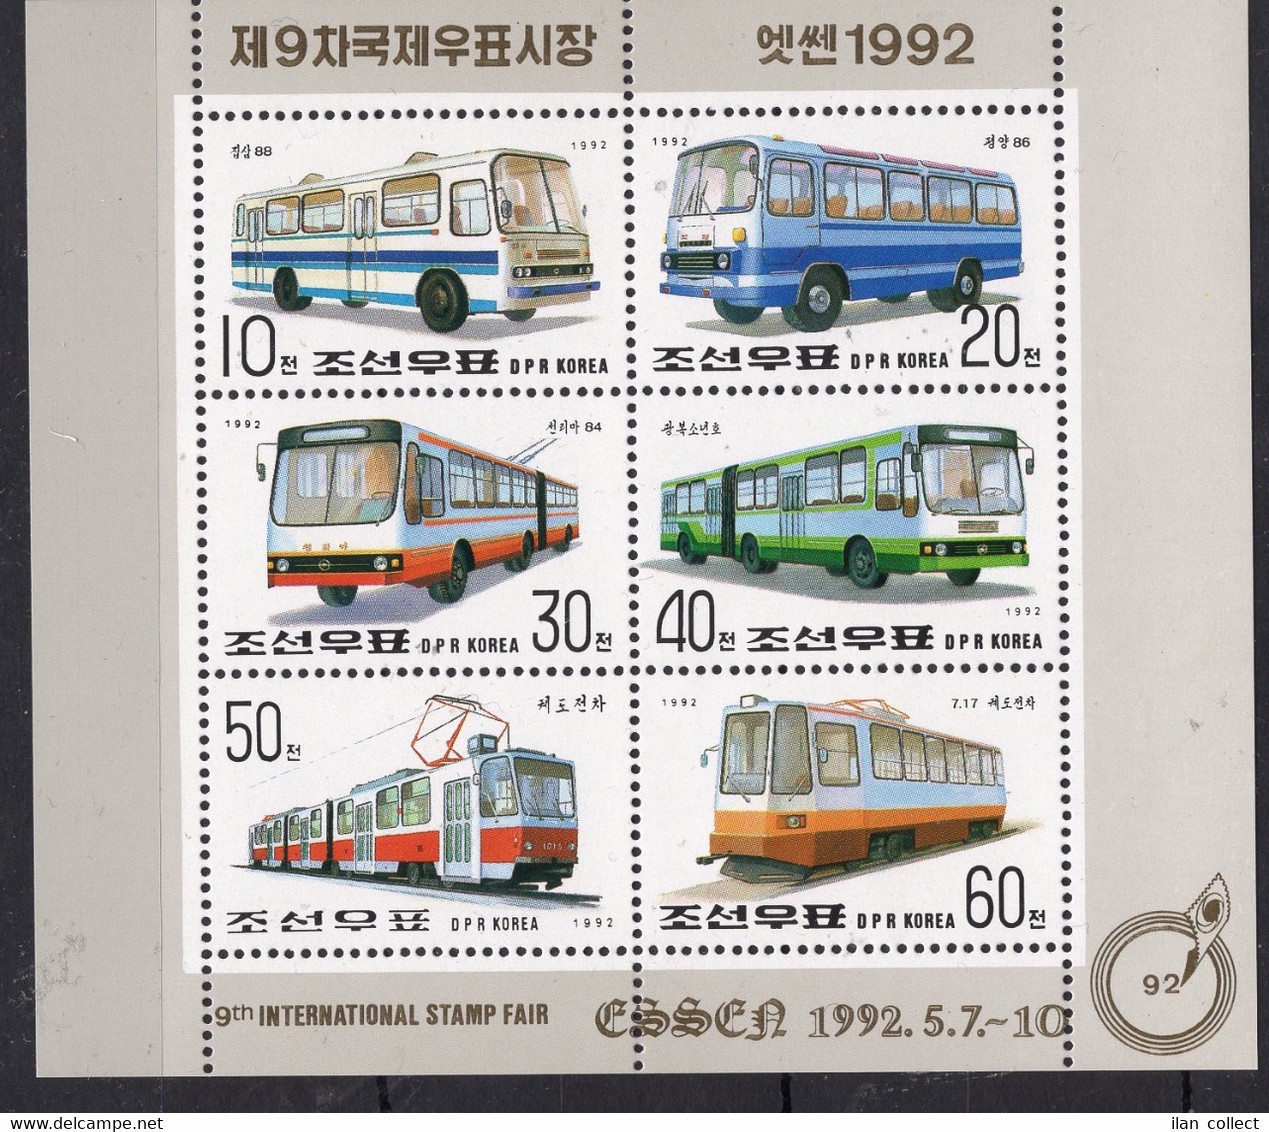 Transport / Busses On Stamps Perf. MNH** - RR1 - Busses